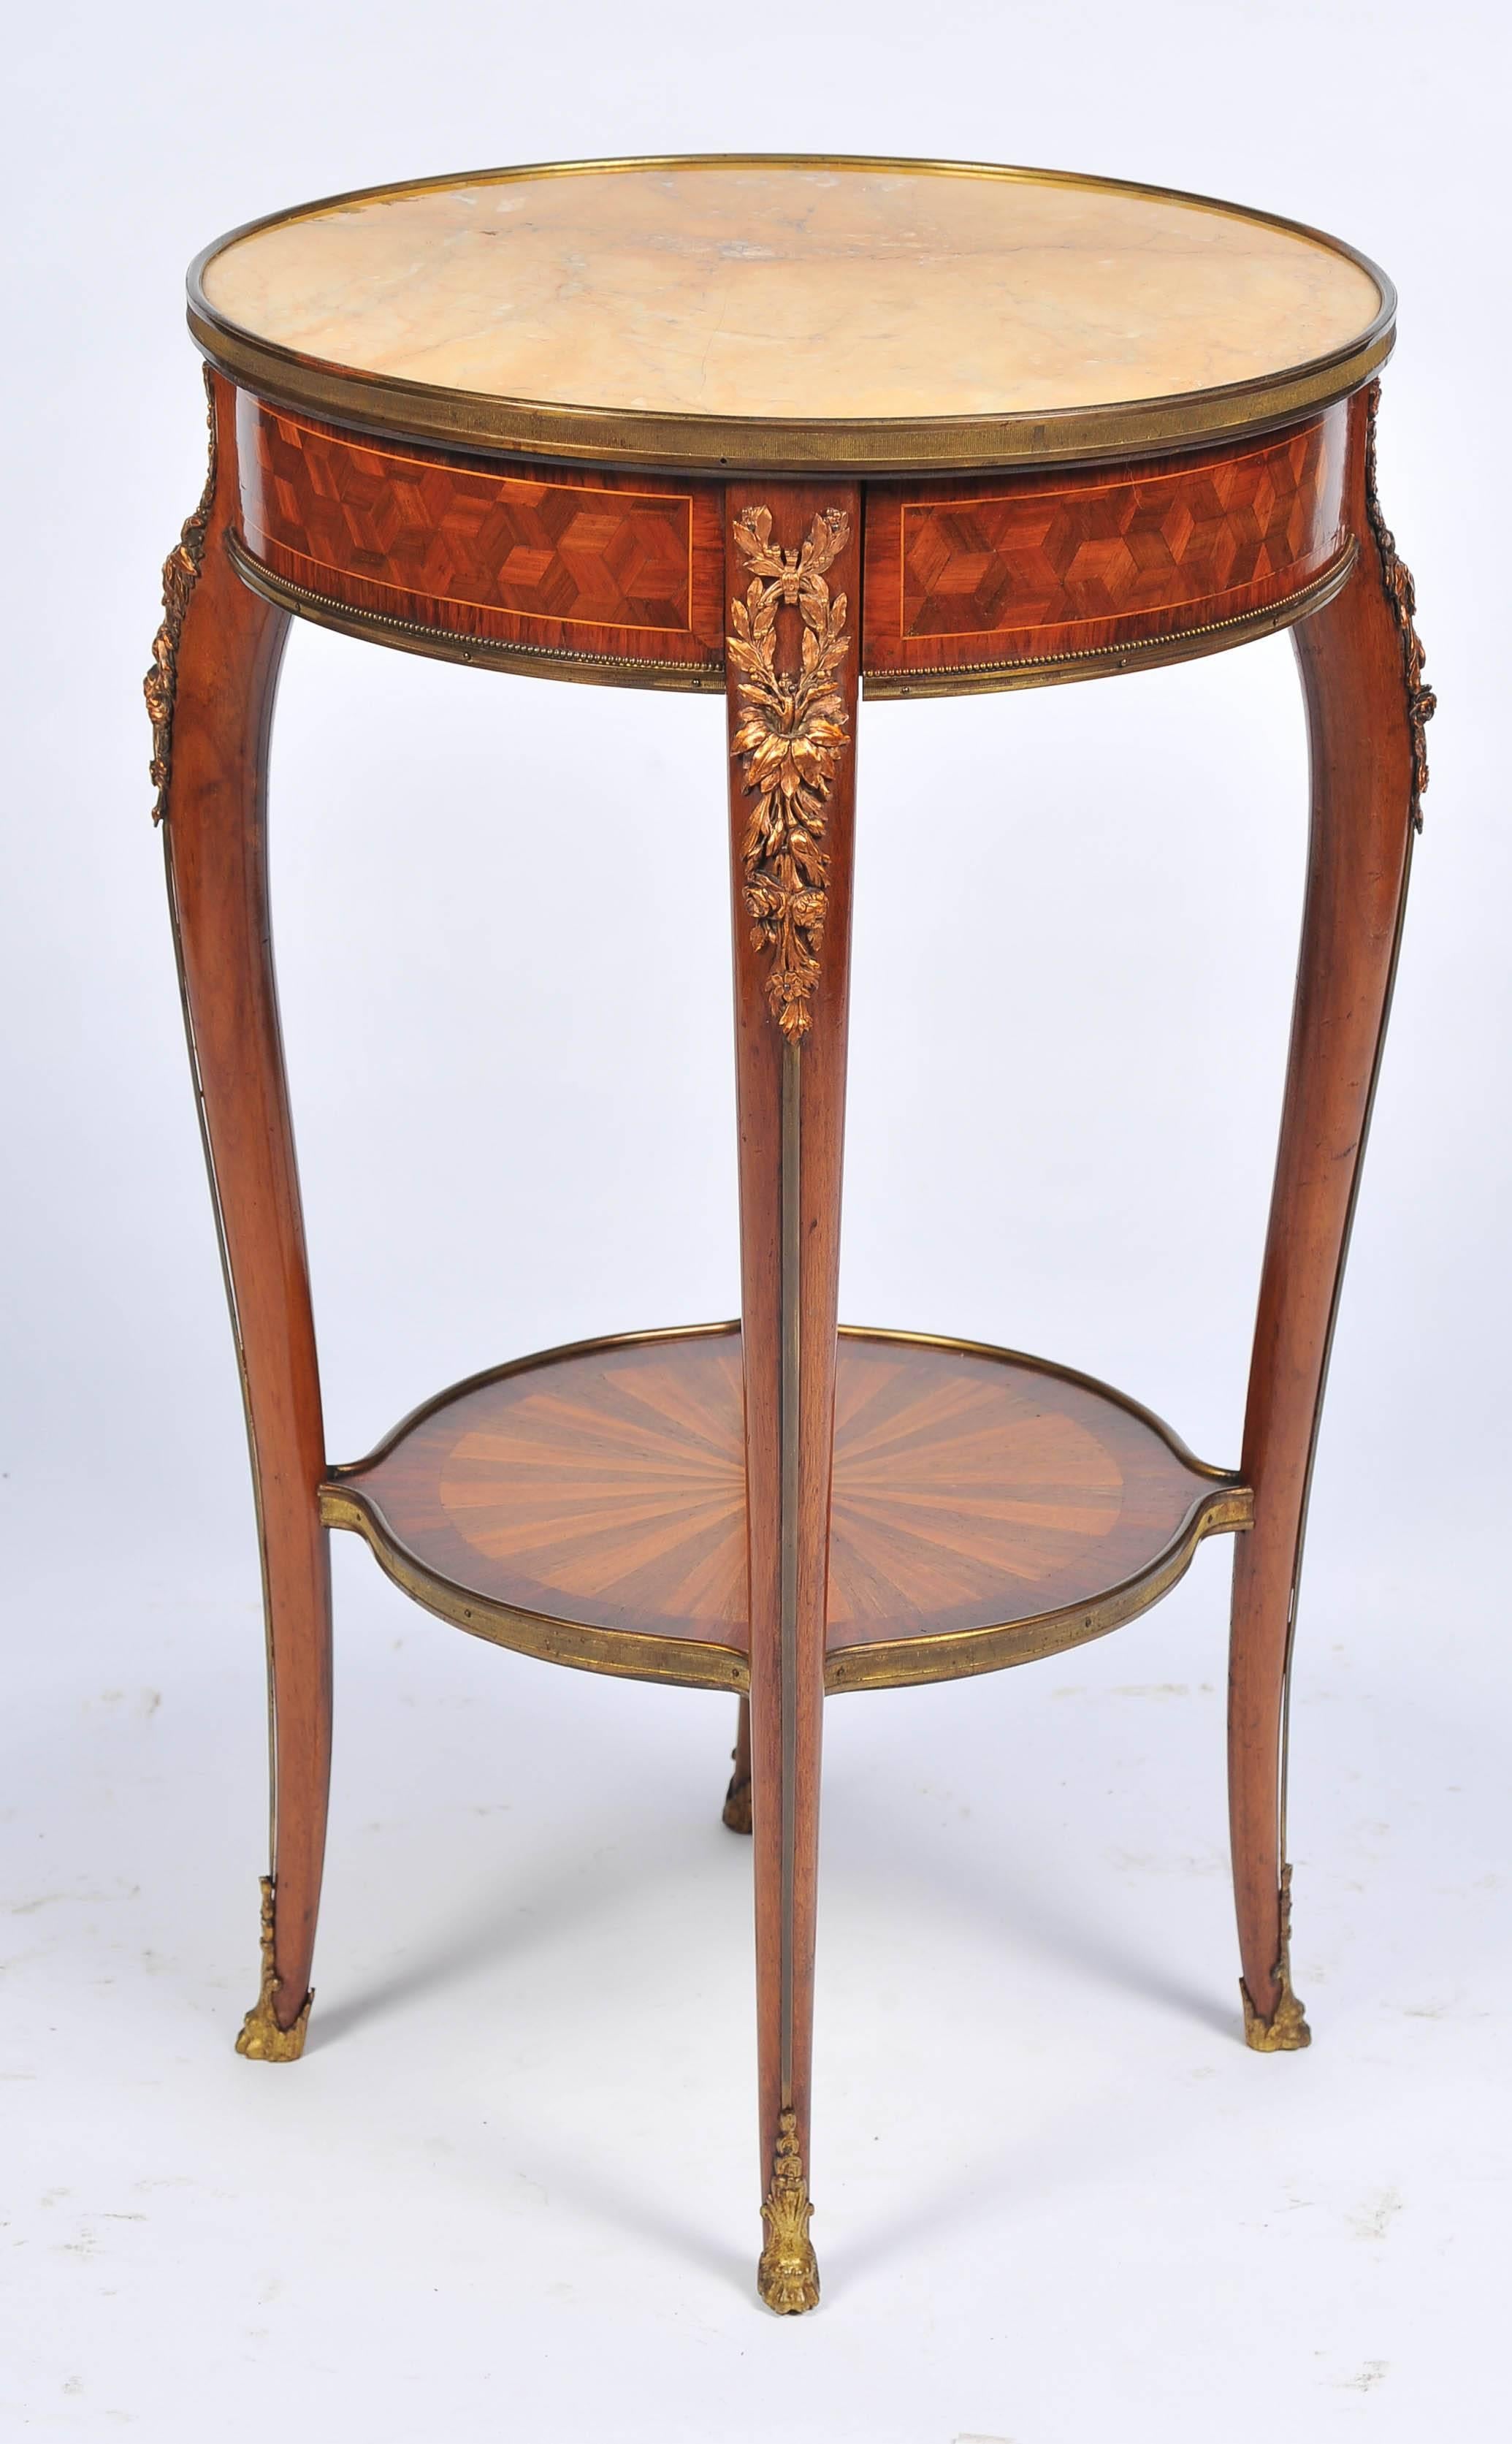 A 19th century French kingwood occasional table, having a sienna marble top, ormolu mounts, a single frieze drawer, raised on four cabriole legs, united by a circular under-tier which has radiating inlaid decoration.